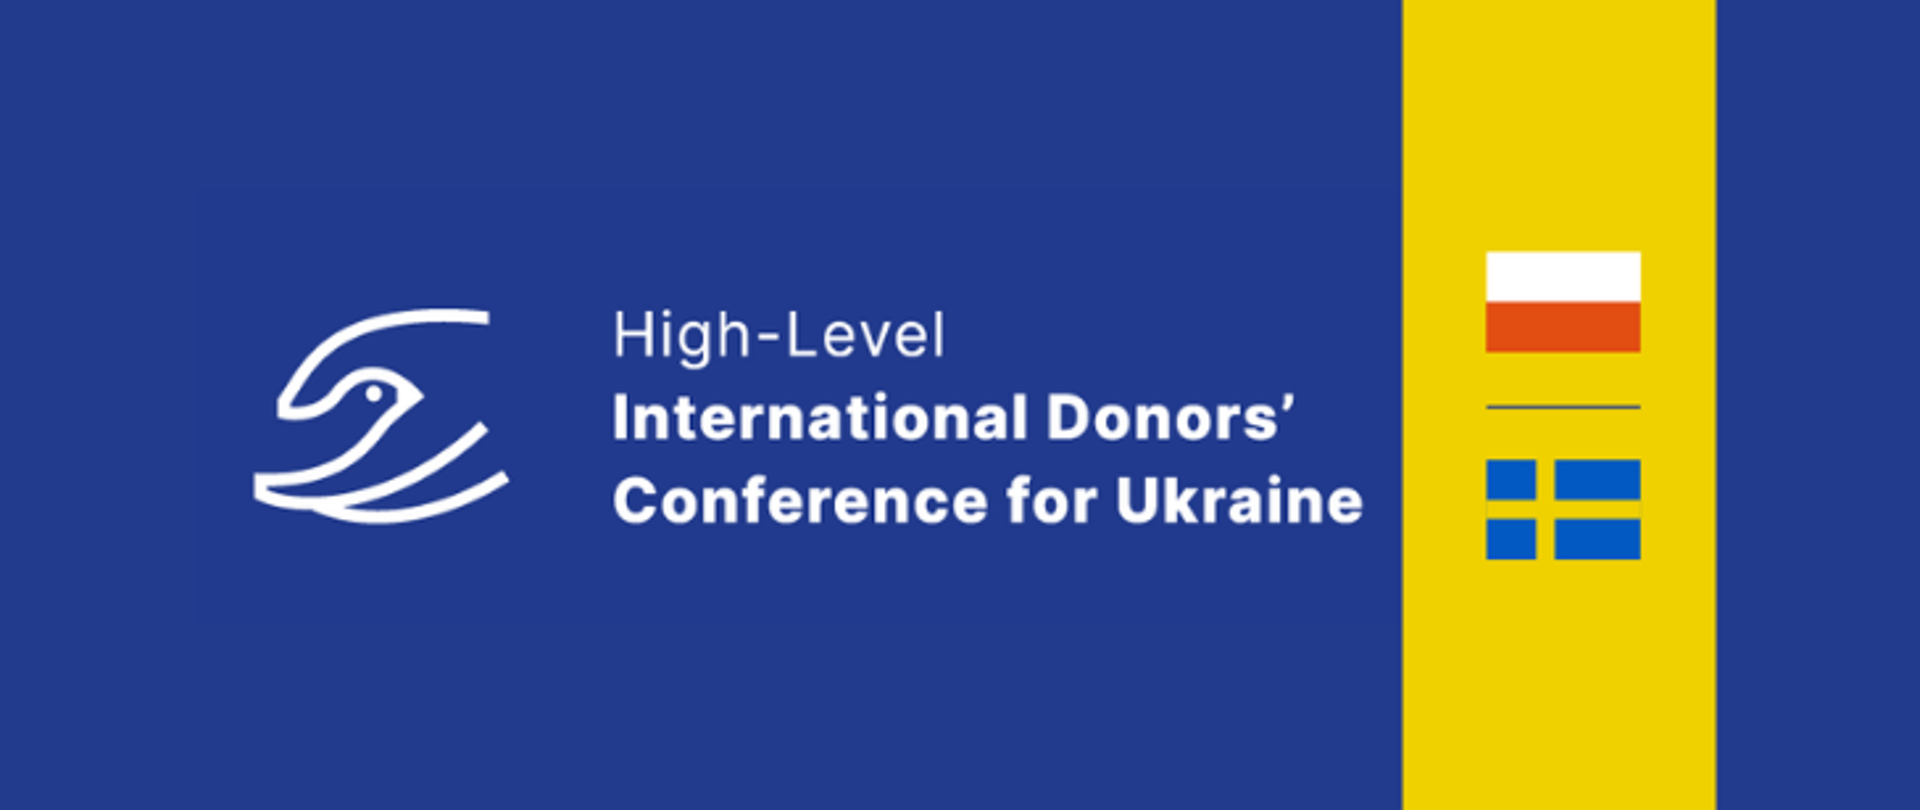 Conference_for_Ukraine_www